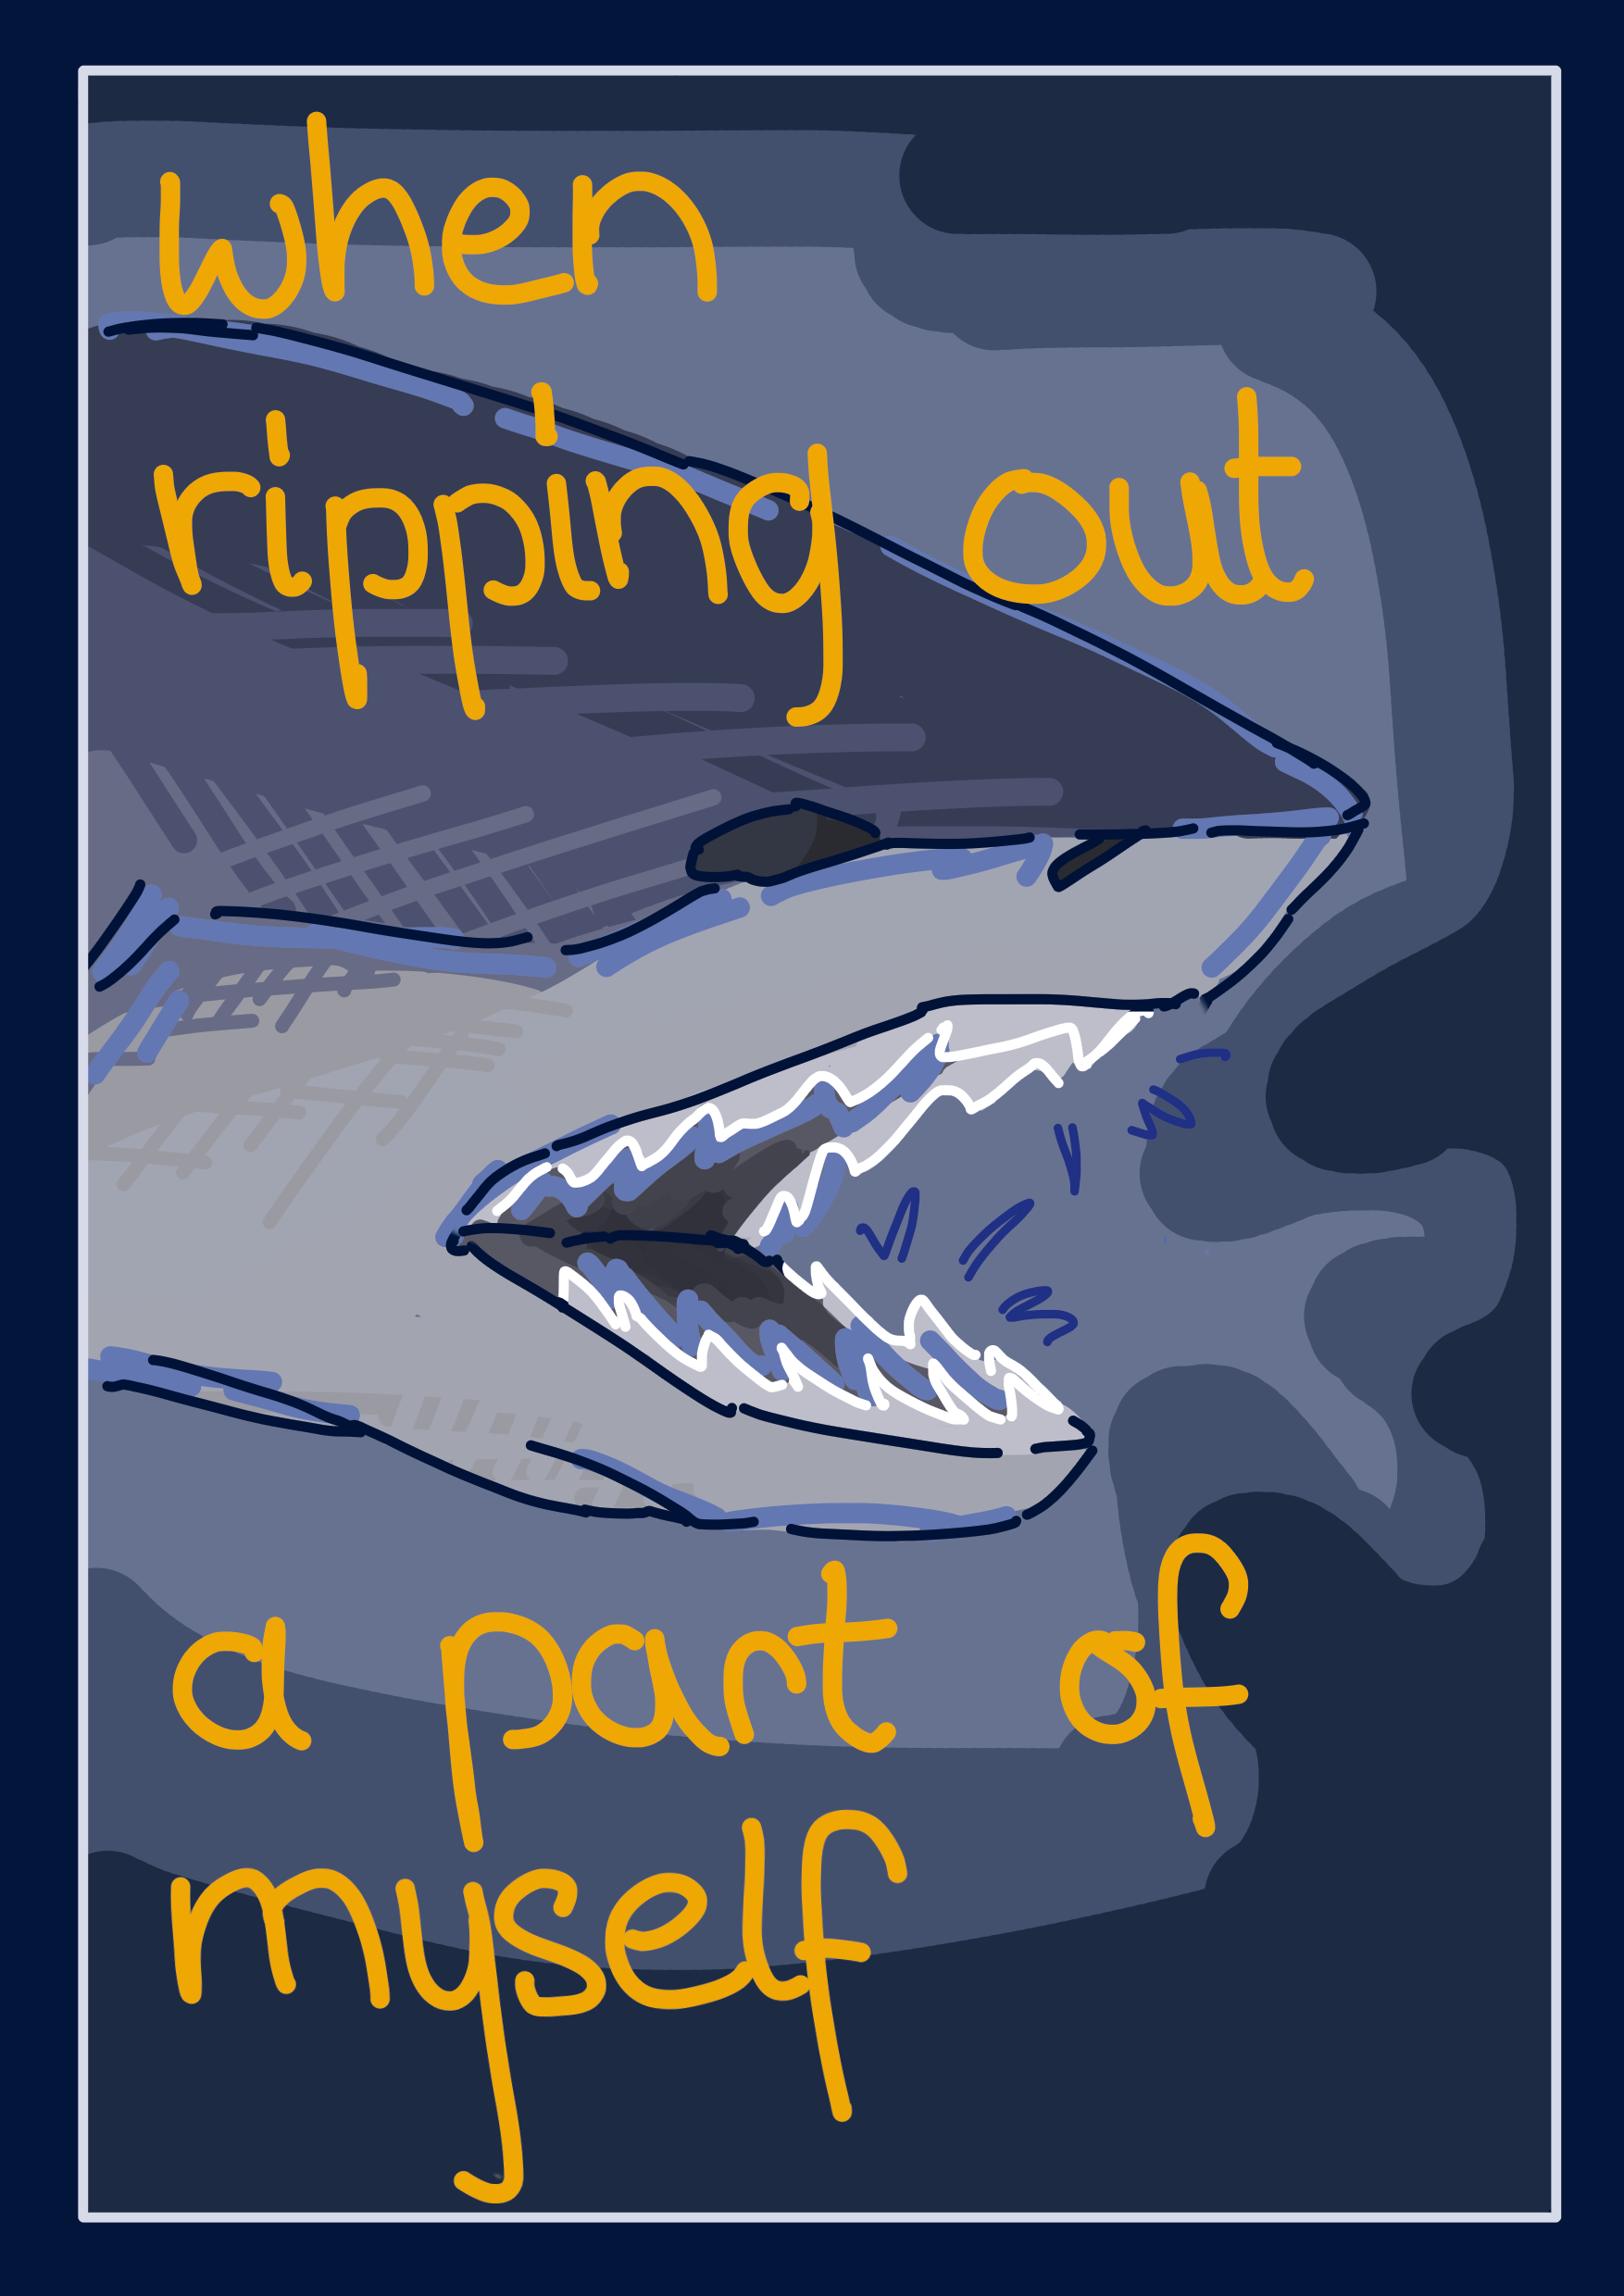 Page five: A sixgill bluntnose shark baring its teeth, ready to put them to use, in front of the dark blue see. Text reads: when ripping out a part of myself.